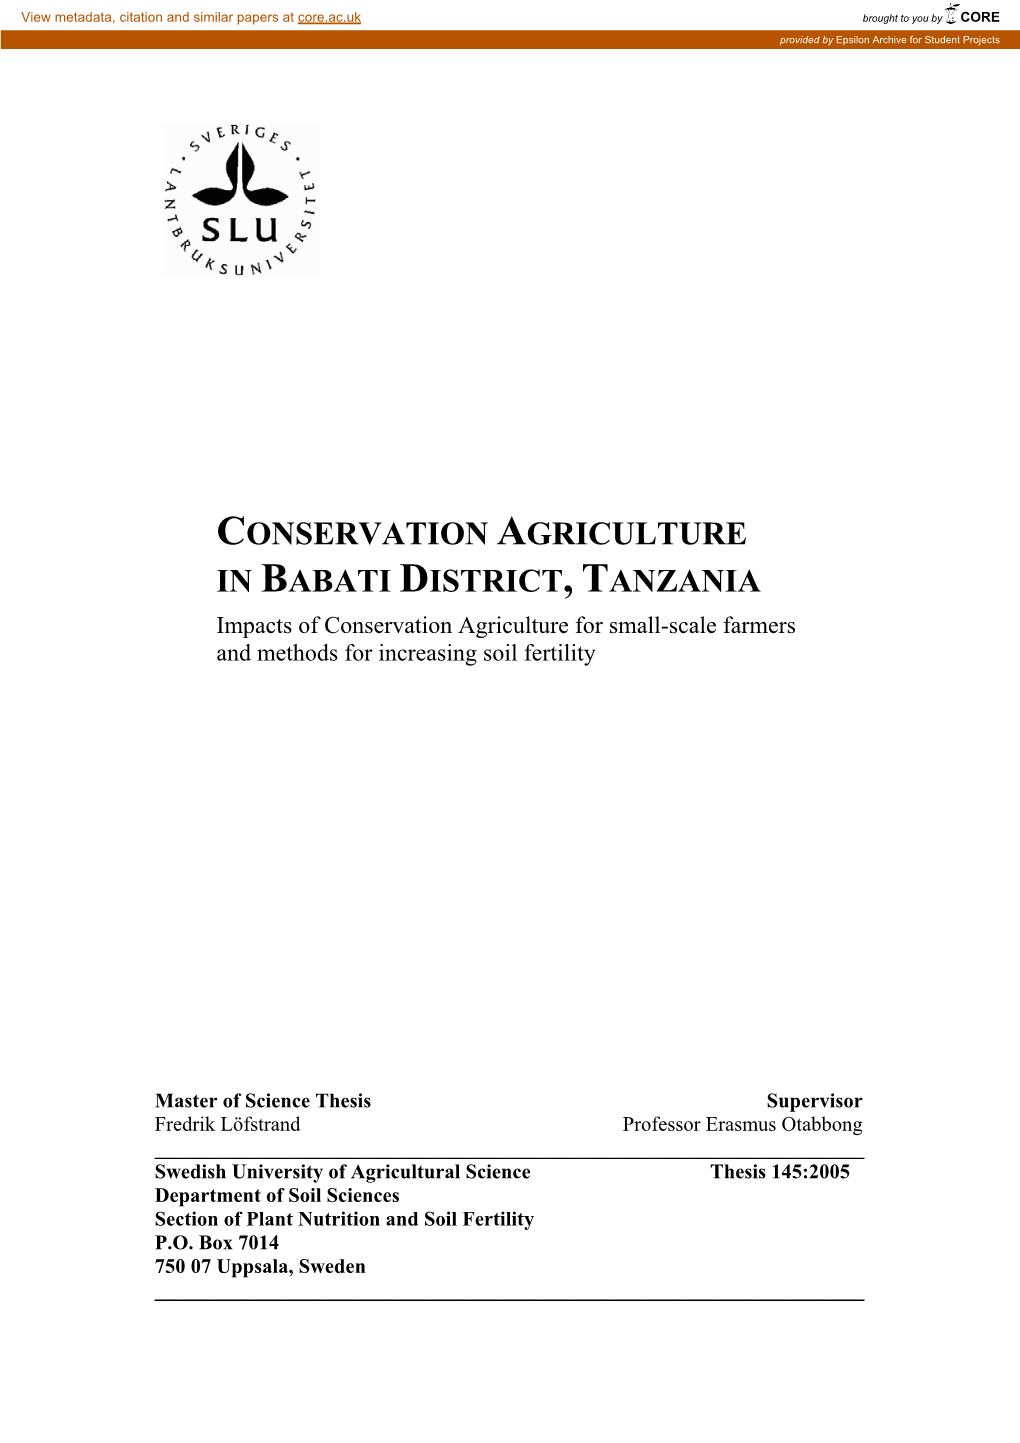 CONSERVATION AGRICULTURE in BABATI DISTRICT, TANZANIA Impacts of Conservation Agriculture for Small-Scale Farmers and Methods for Increasing Soil Fertility